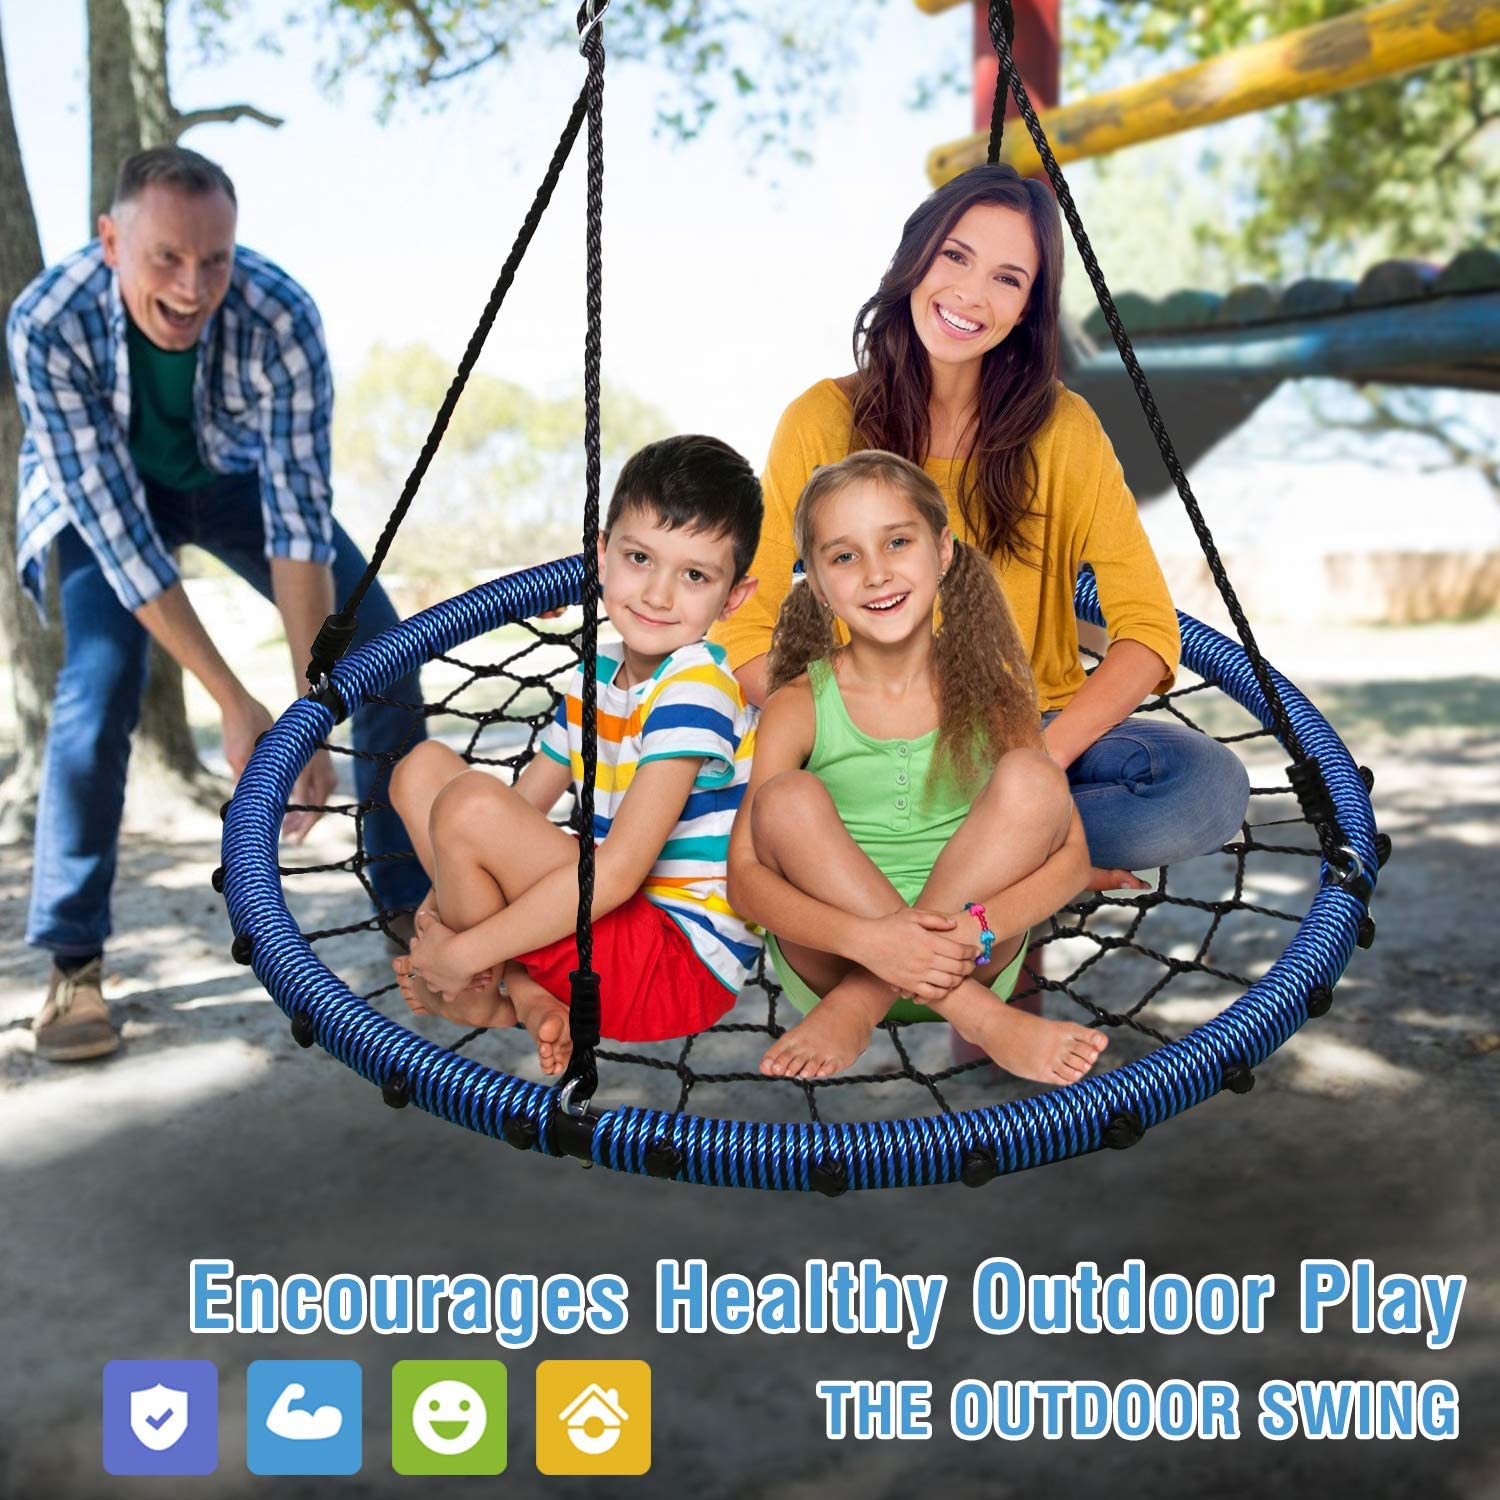 Trekassy 750lbs Spider Web Tree Swing 45 inch for Kids Adults with Swivel